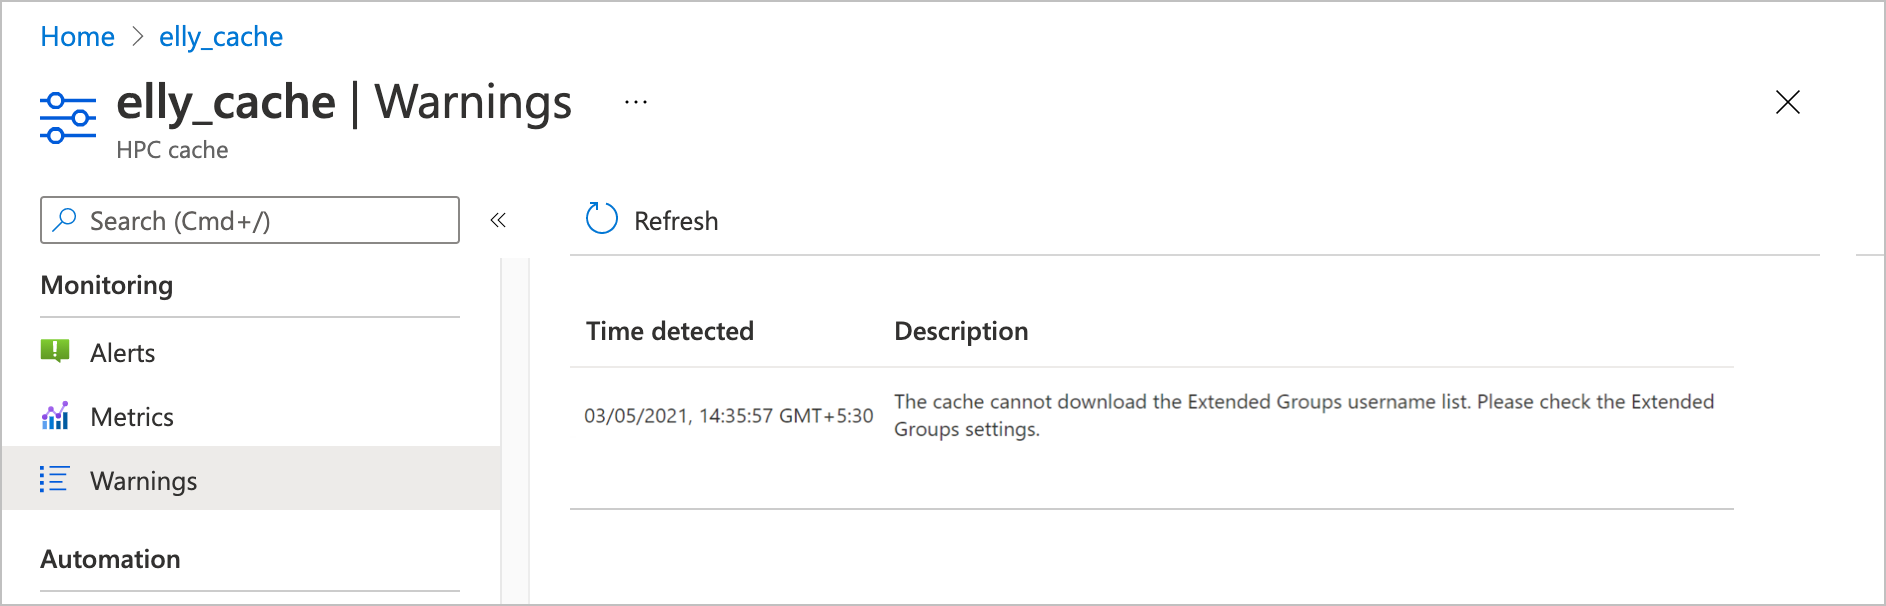 screenshot of the Monitoring > Warnings page showing a message that extended groups usernames could not be downloaded